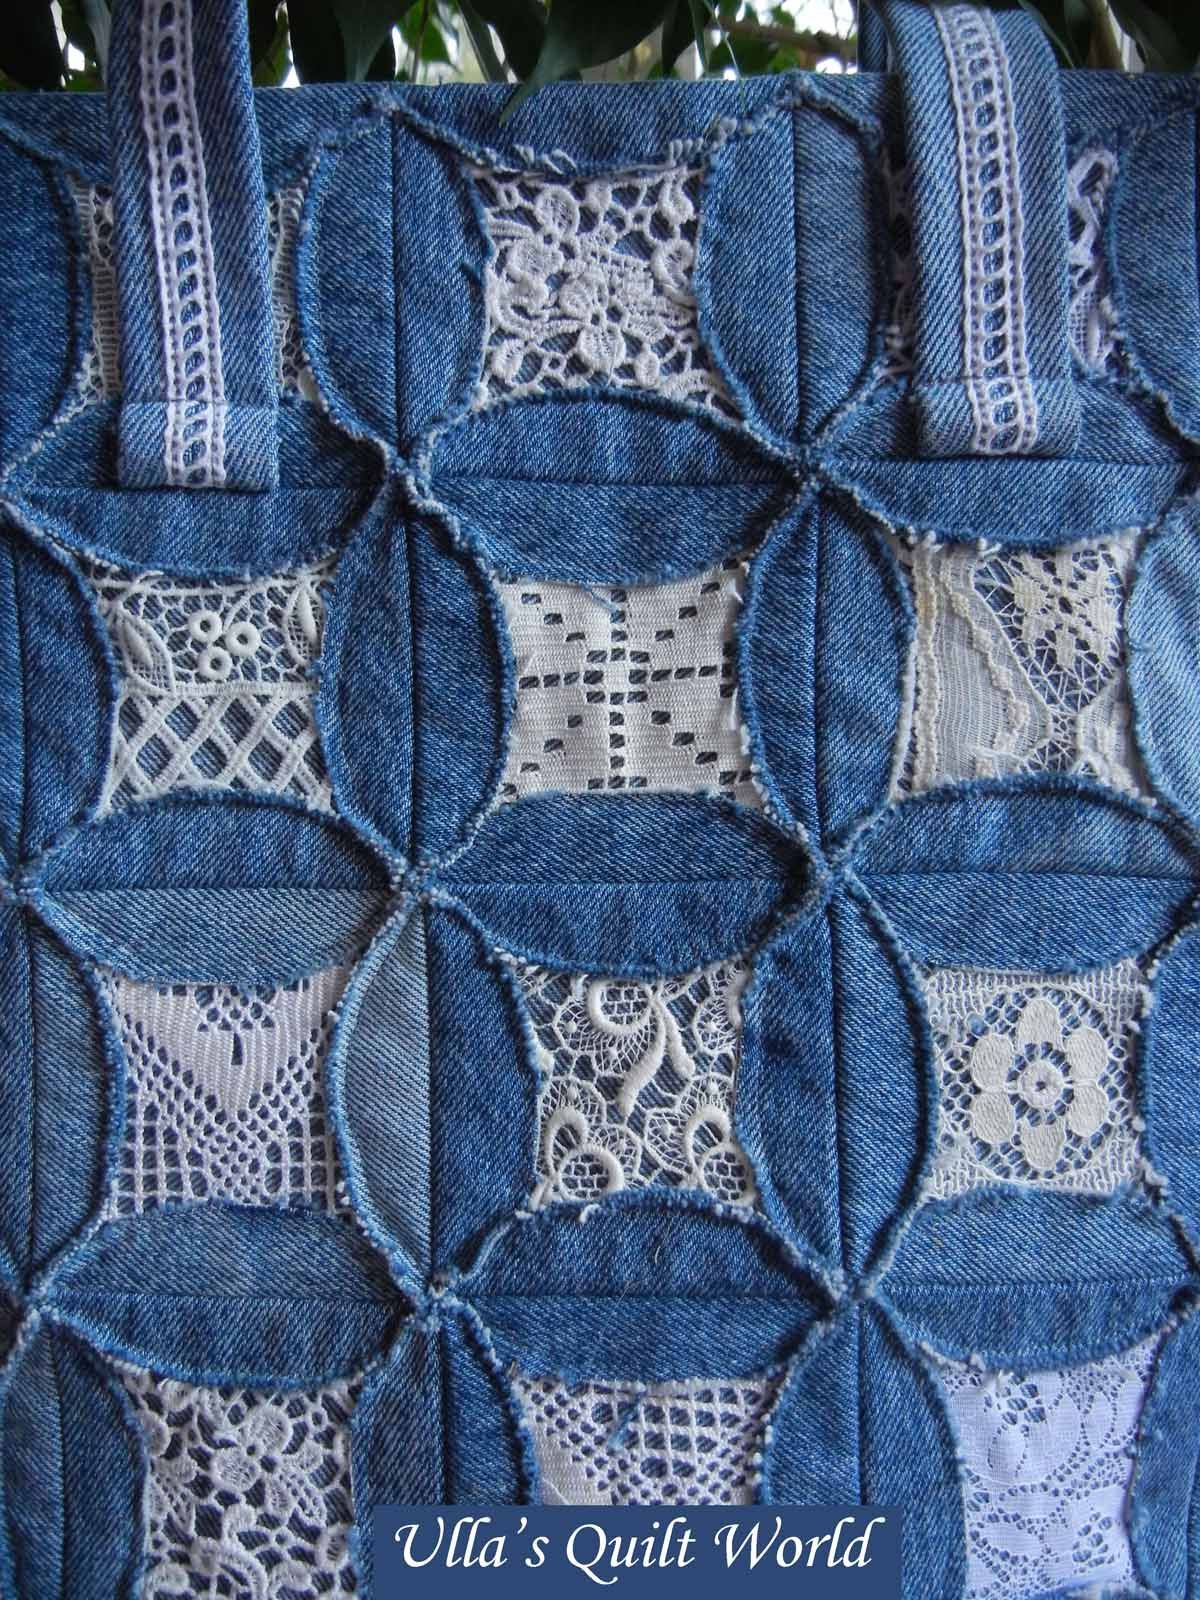 I know that this is a bag, but I may have to make a quilt like this.  faux cathedral quilt & lace.  This would be a great way to